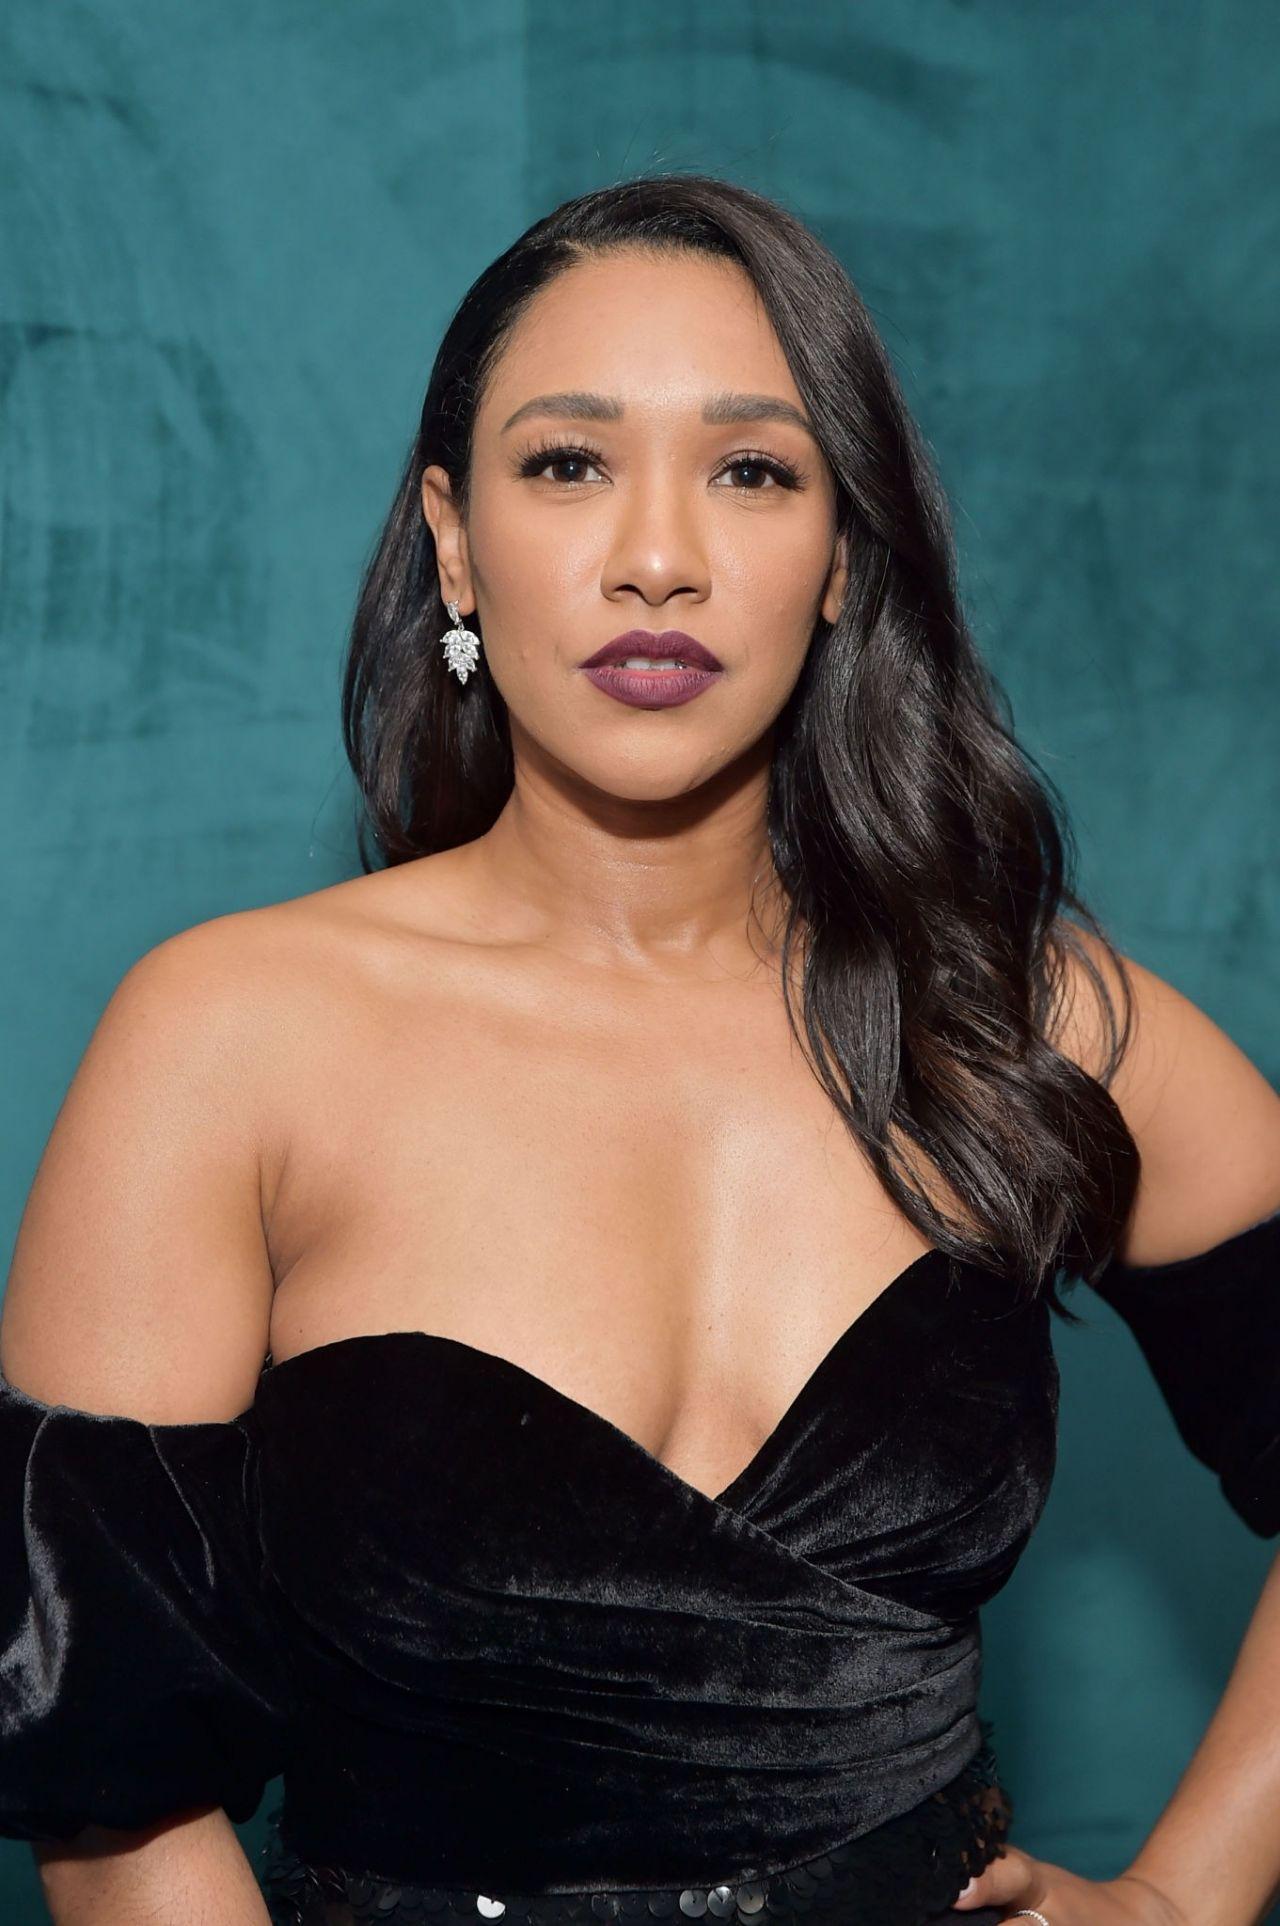 70+ Hot Pictures Of Candice Patton Who Plays Iris West In Flash TV Series 28